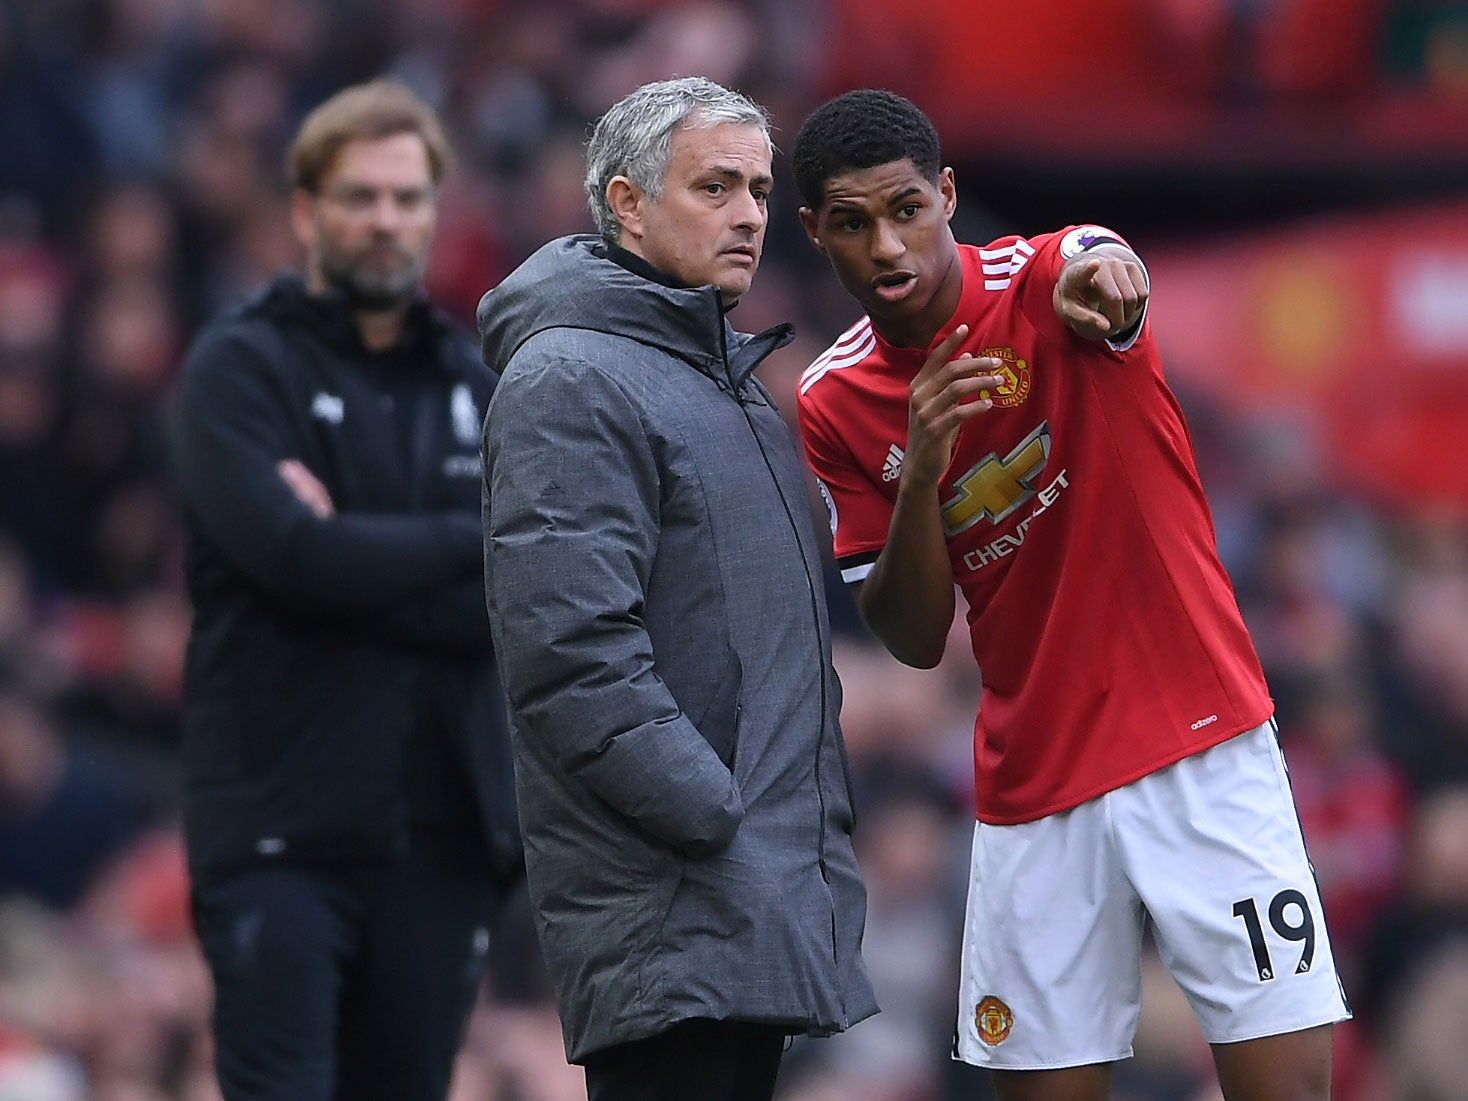 Marcus Rashford takes instructions from Jose Mourinho during the win over Liverpool